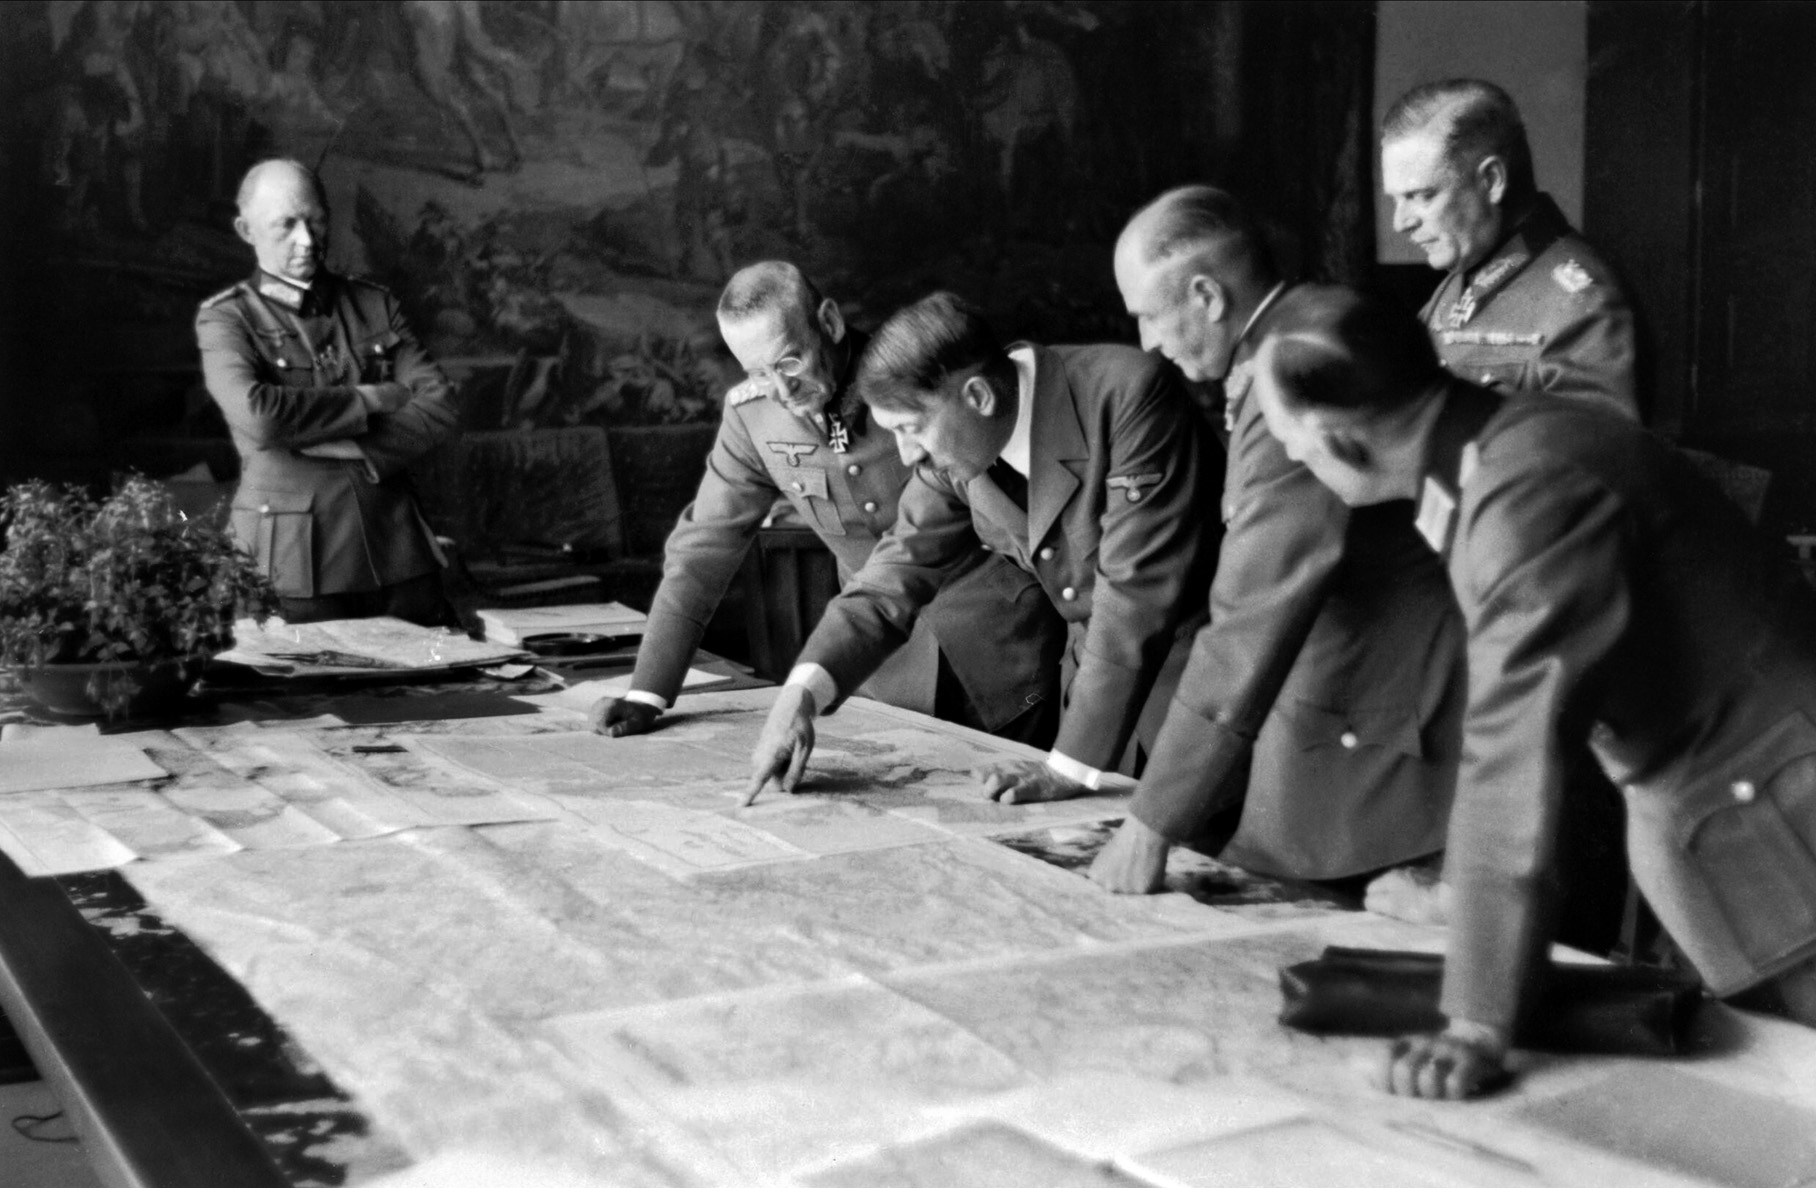 Hitler and several of his generals pore over a military map in this photo taken in 1940. Four years later, Hitler had become dissatisfied with many of his top commanders. When his subordinates expressed concerns for the success of the desperate gamble in the West, the Fuhrer was undeterred and ordered the Ardennes Offensive to proceed.